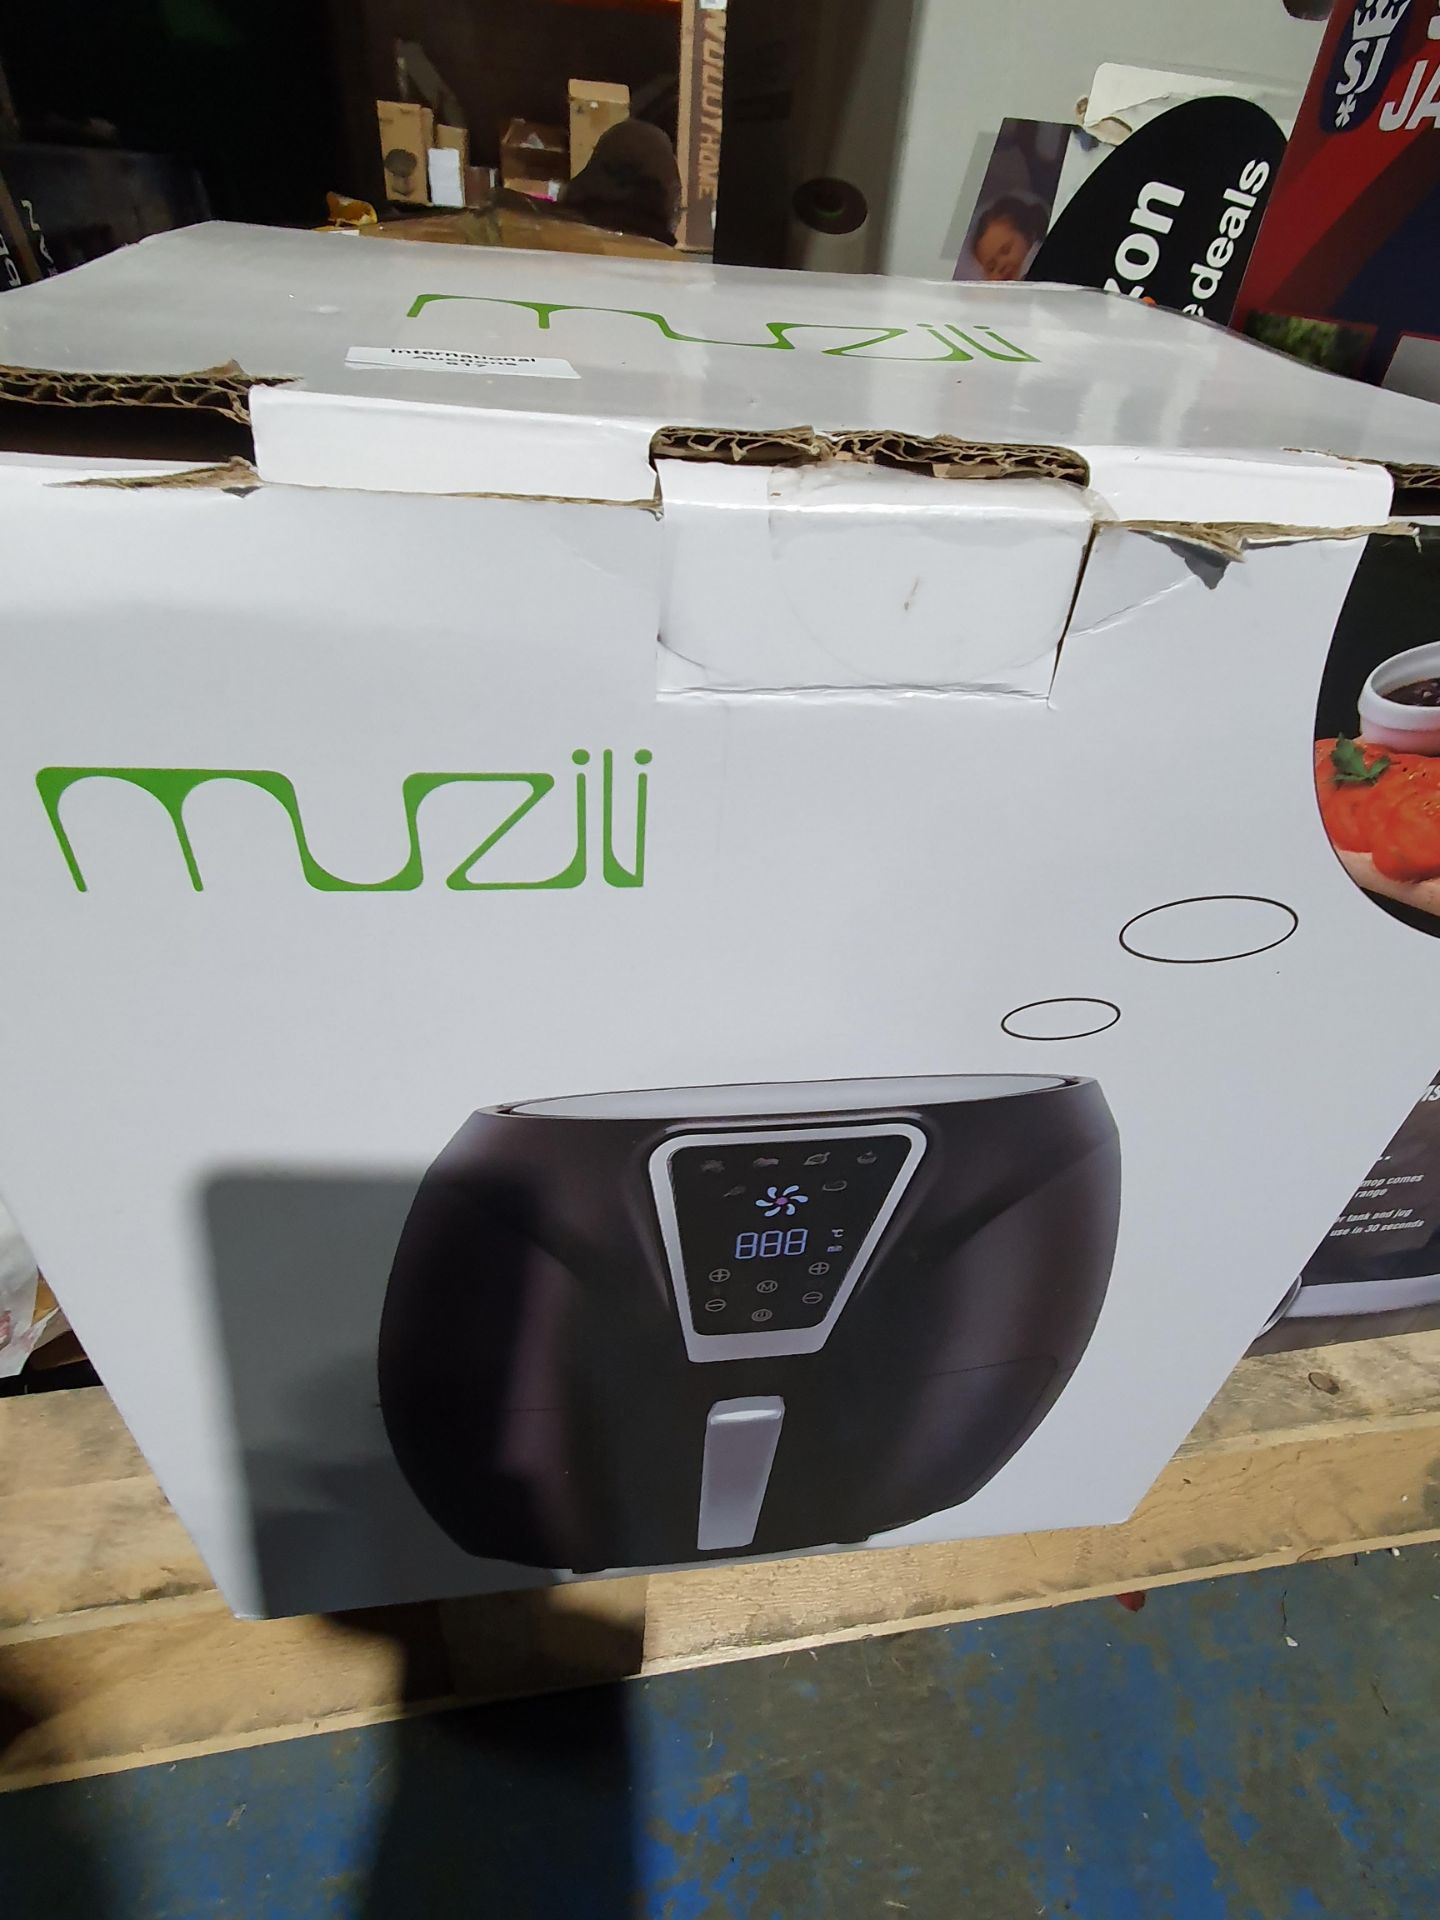 MUZII AIR FRYER RRP £90Condition ReportAppraisal Available on Request - All Items are Unchecked/